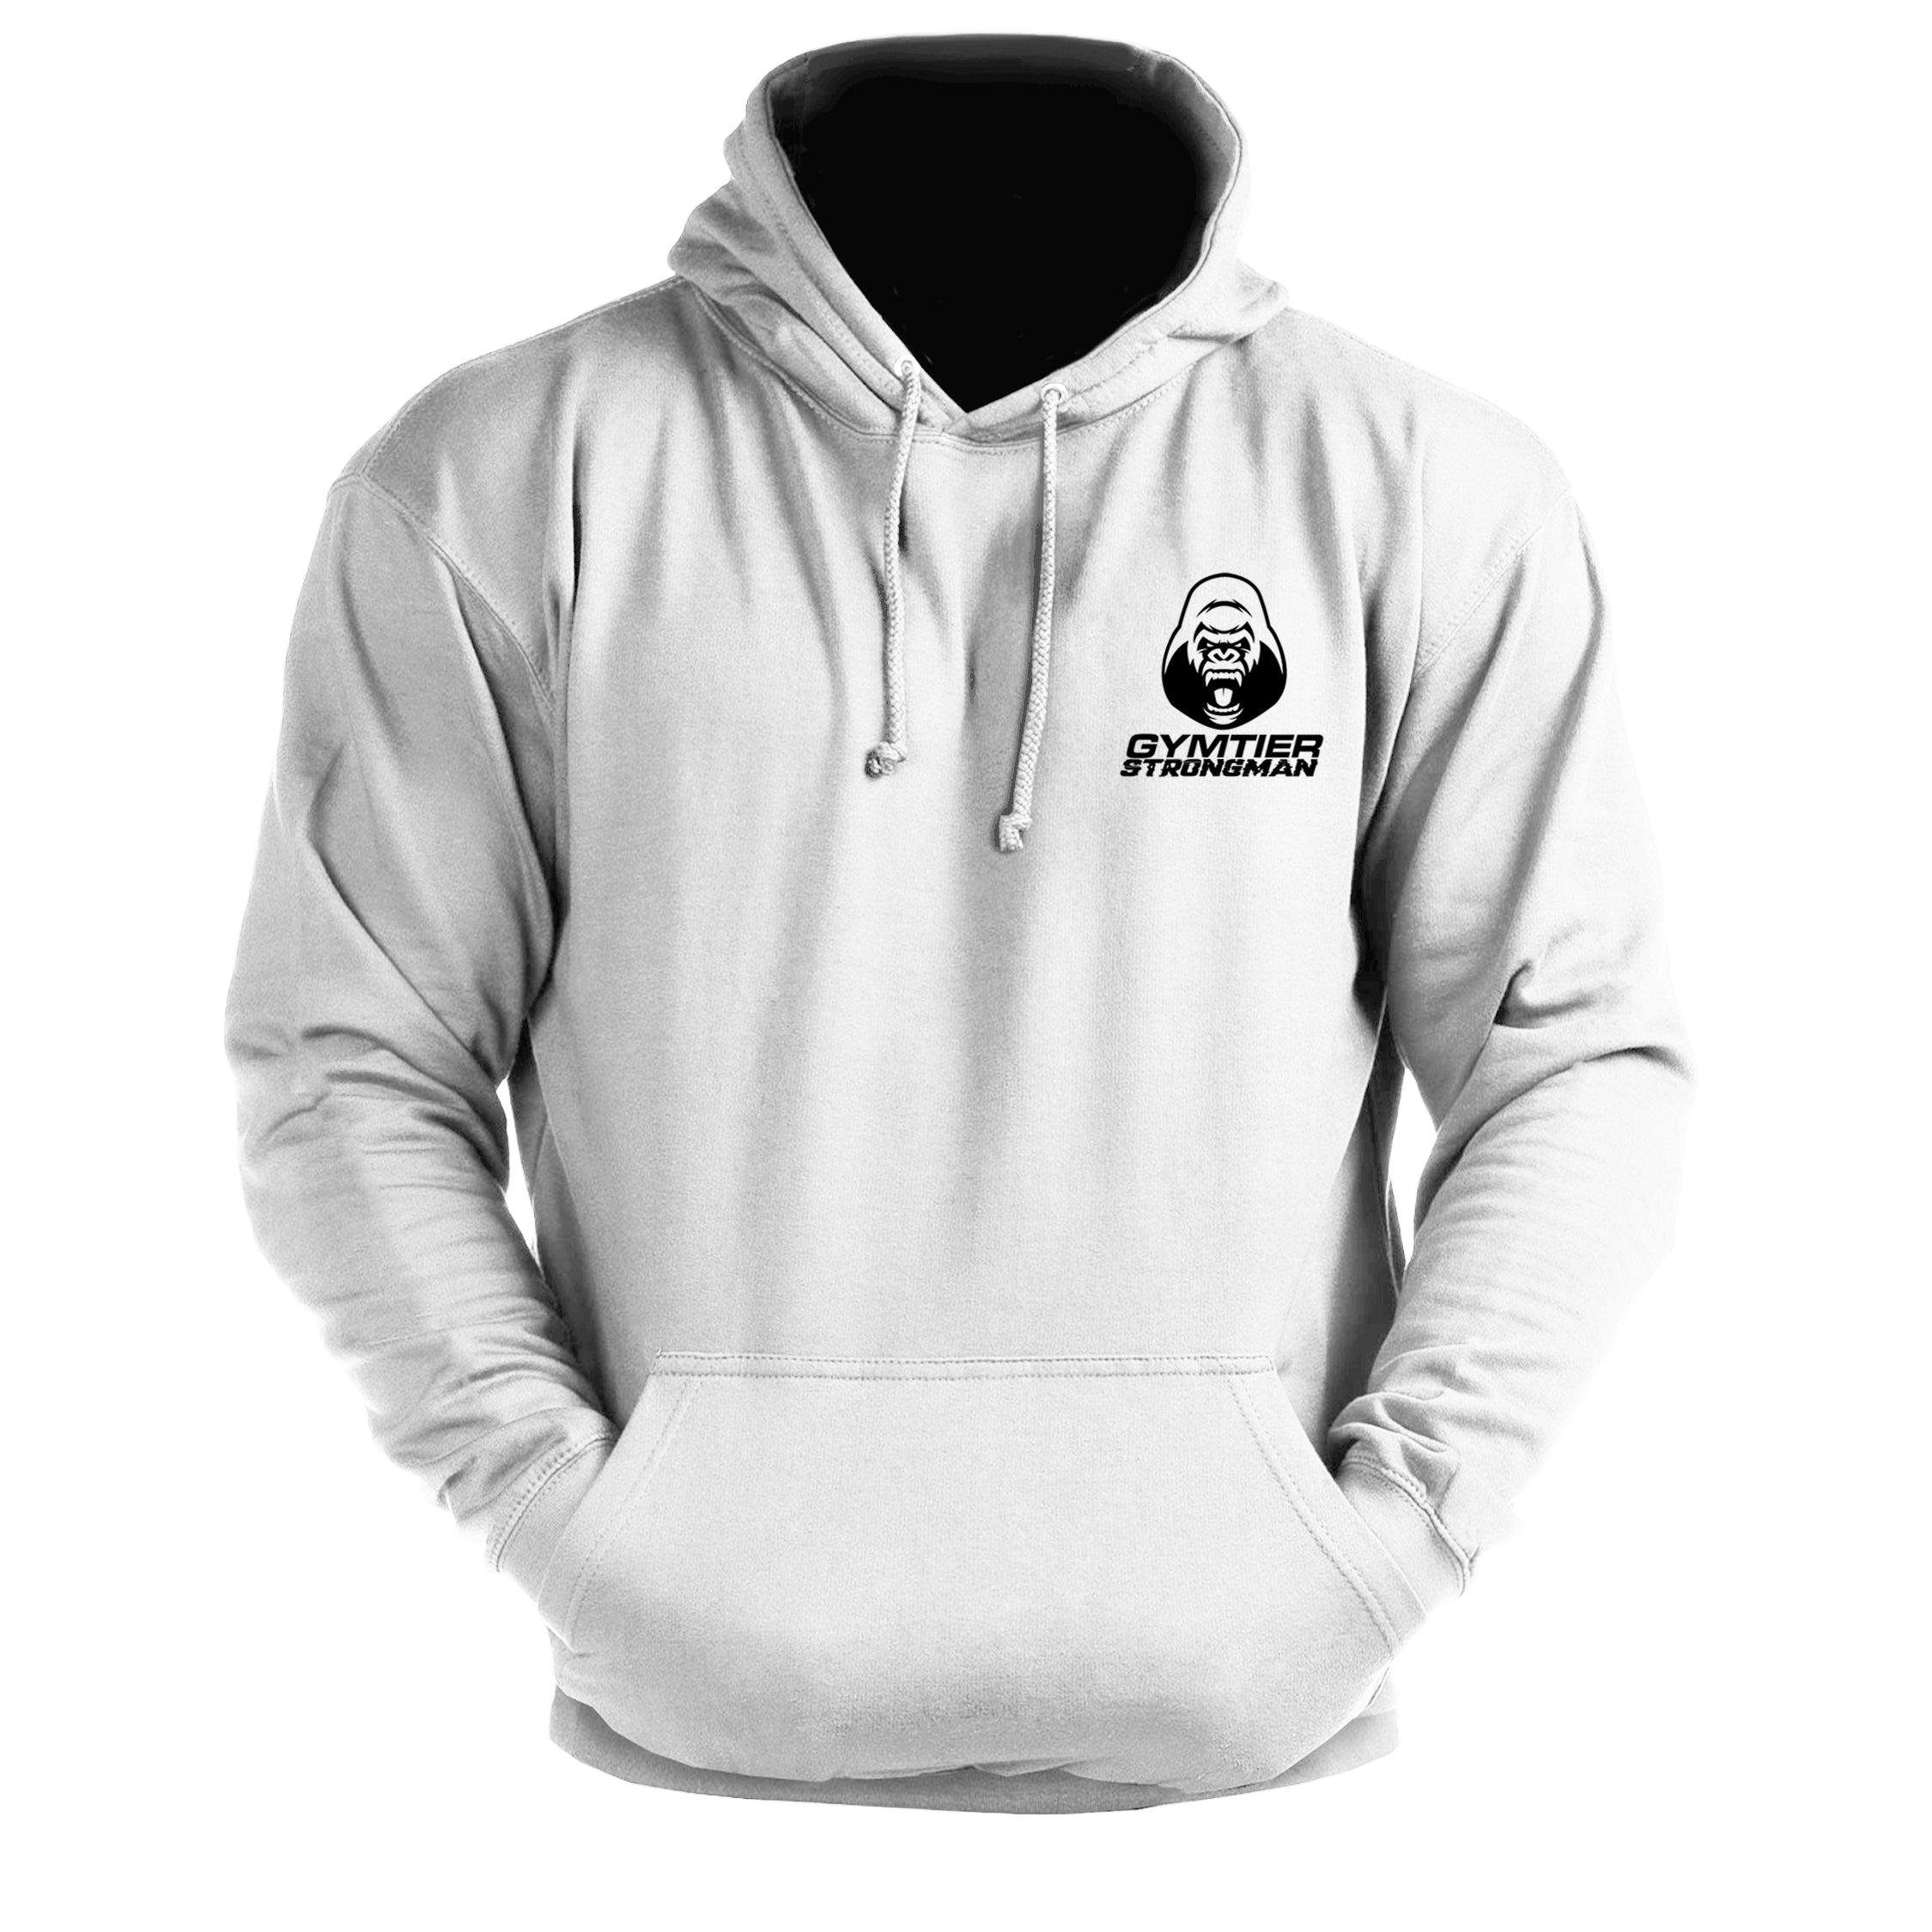 GYMTIER Strongman - Gym Hoodie